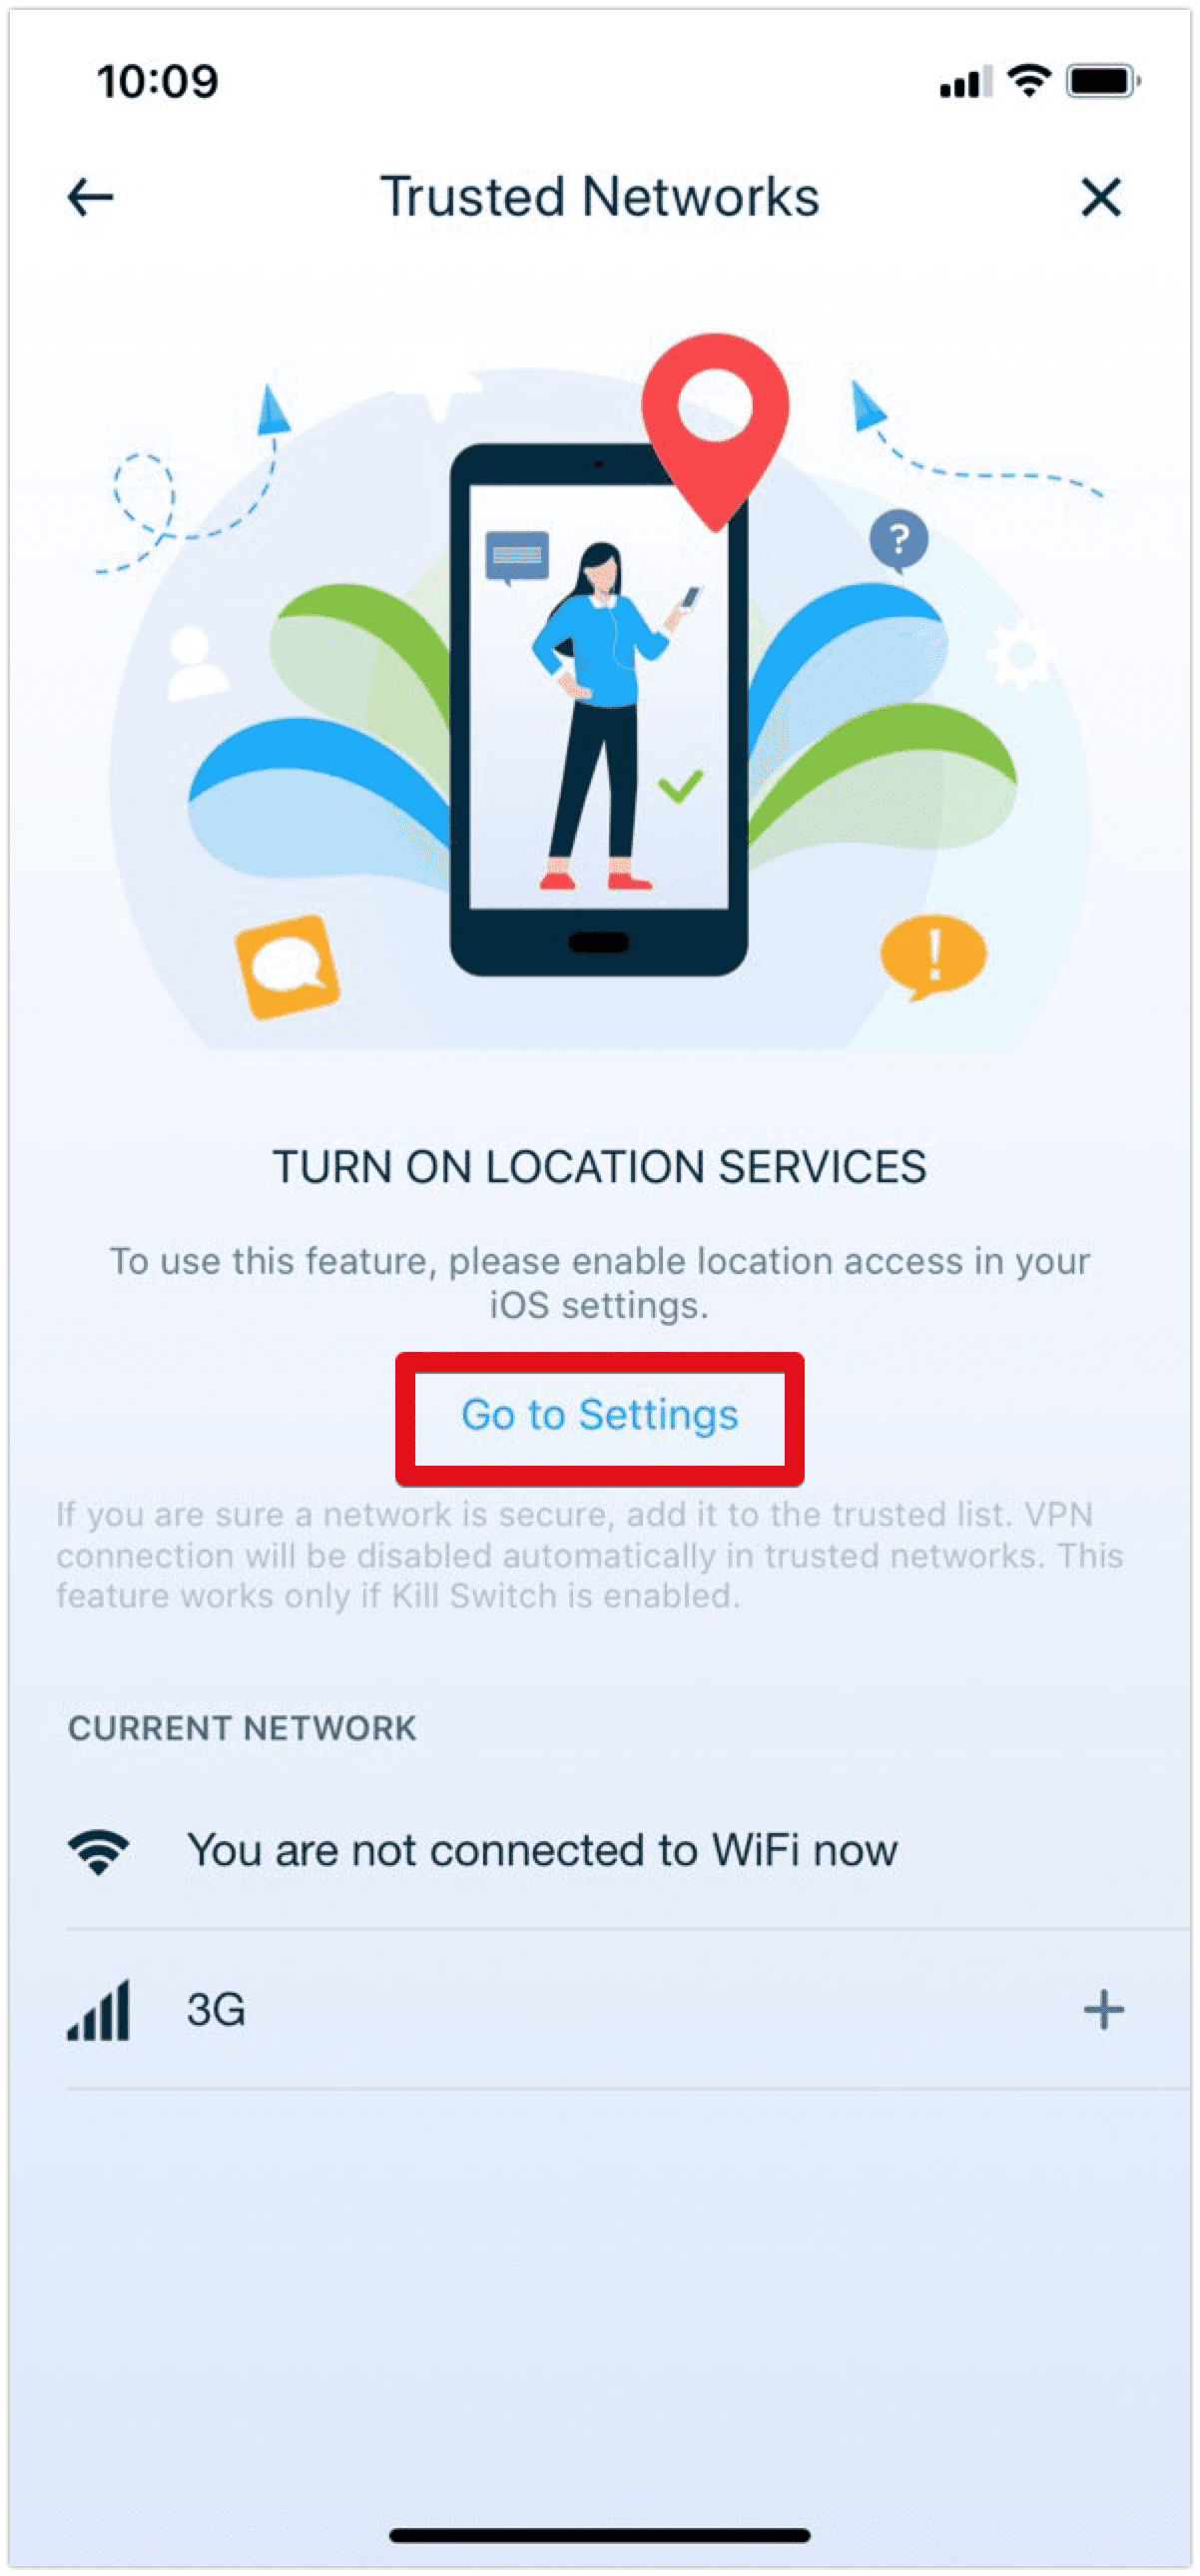 Turn on Location Services to use the Trusted Networks feature